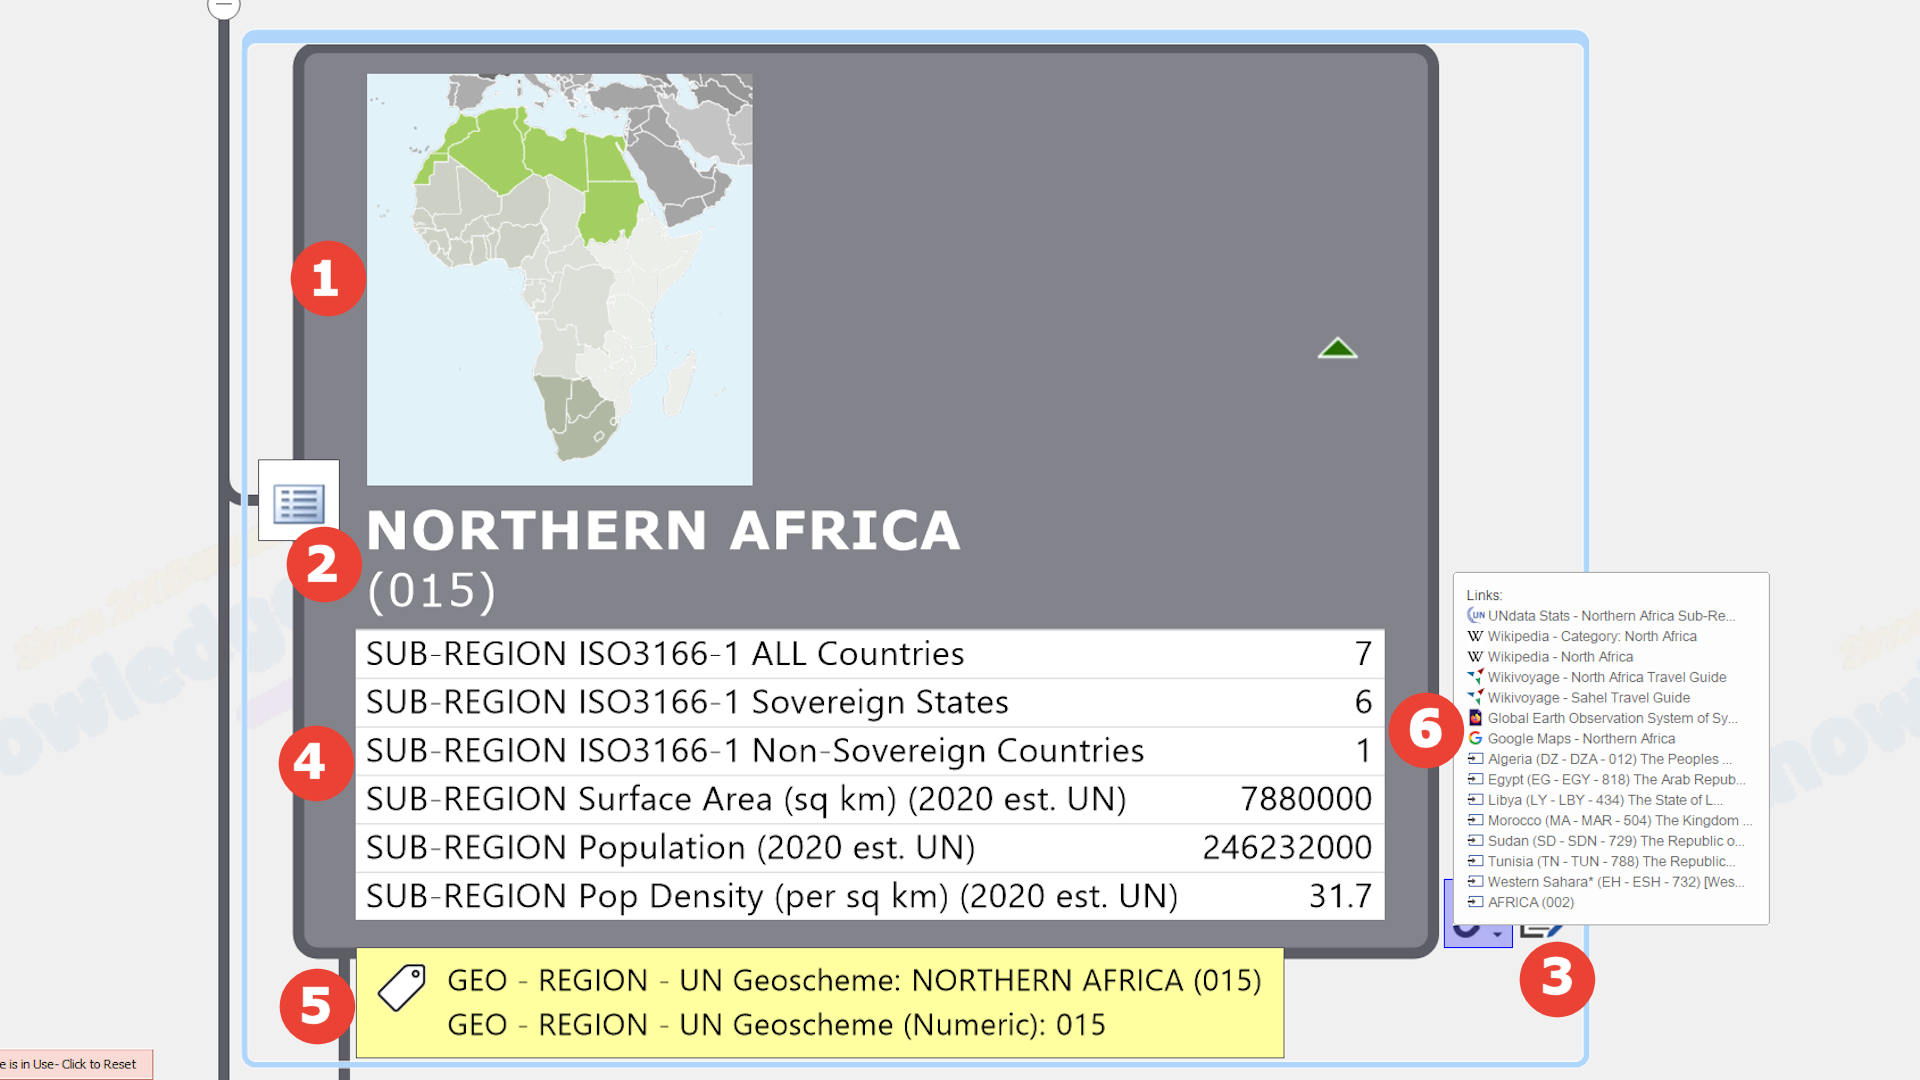 Image_Countries_Feature_GeoScheme-Sub-Region_Seed-Topic_ANNOTATED_1c_1920x1080